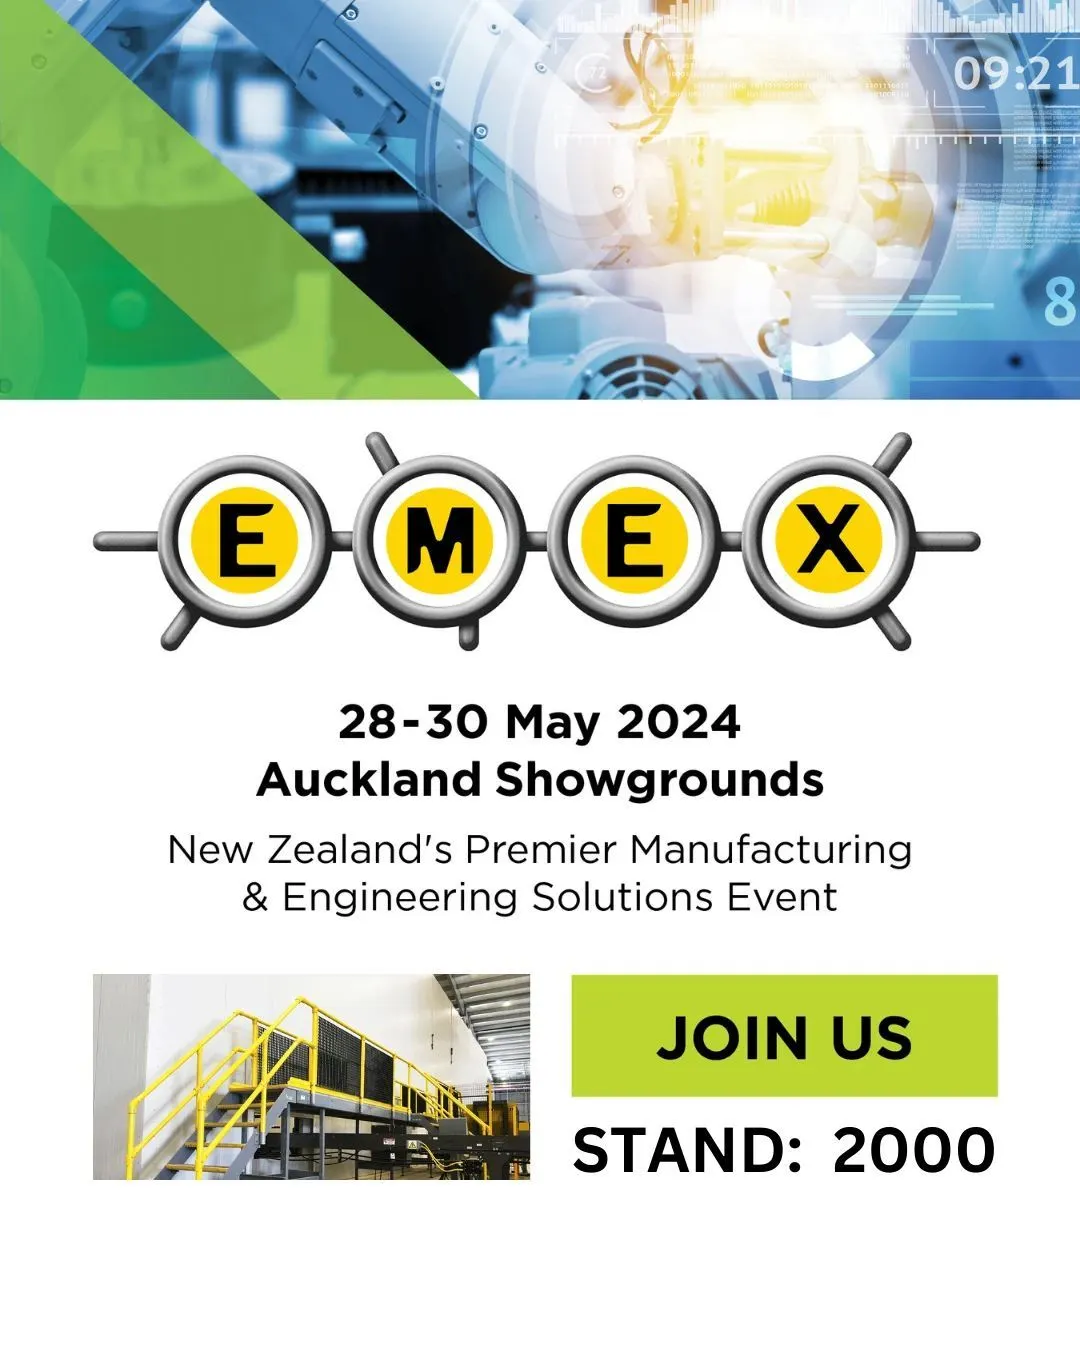 We'll be at EMEX later this month, hope to see you there!

#frp #frpproducts #emex #emex2024 #engineers #engineering #manufacturing #industrial